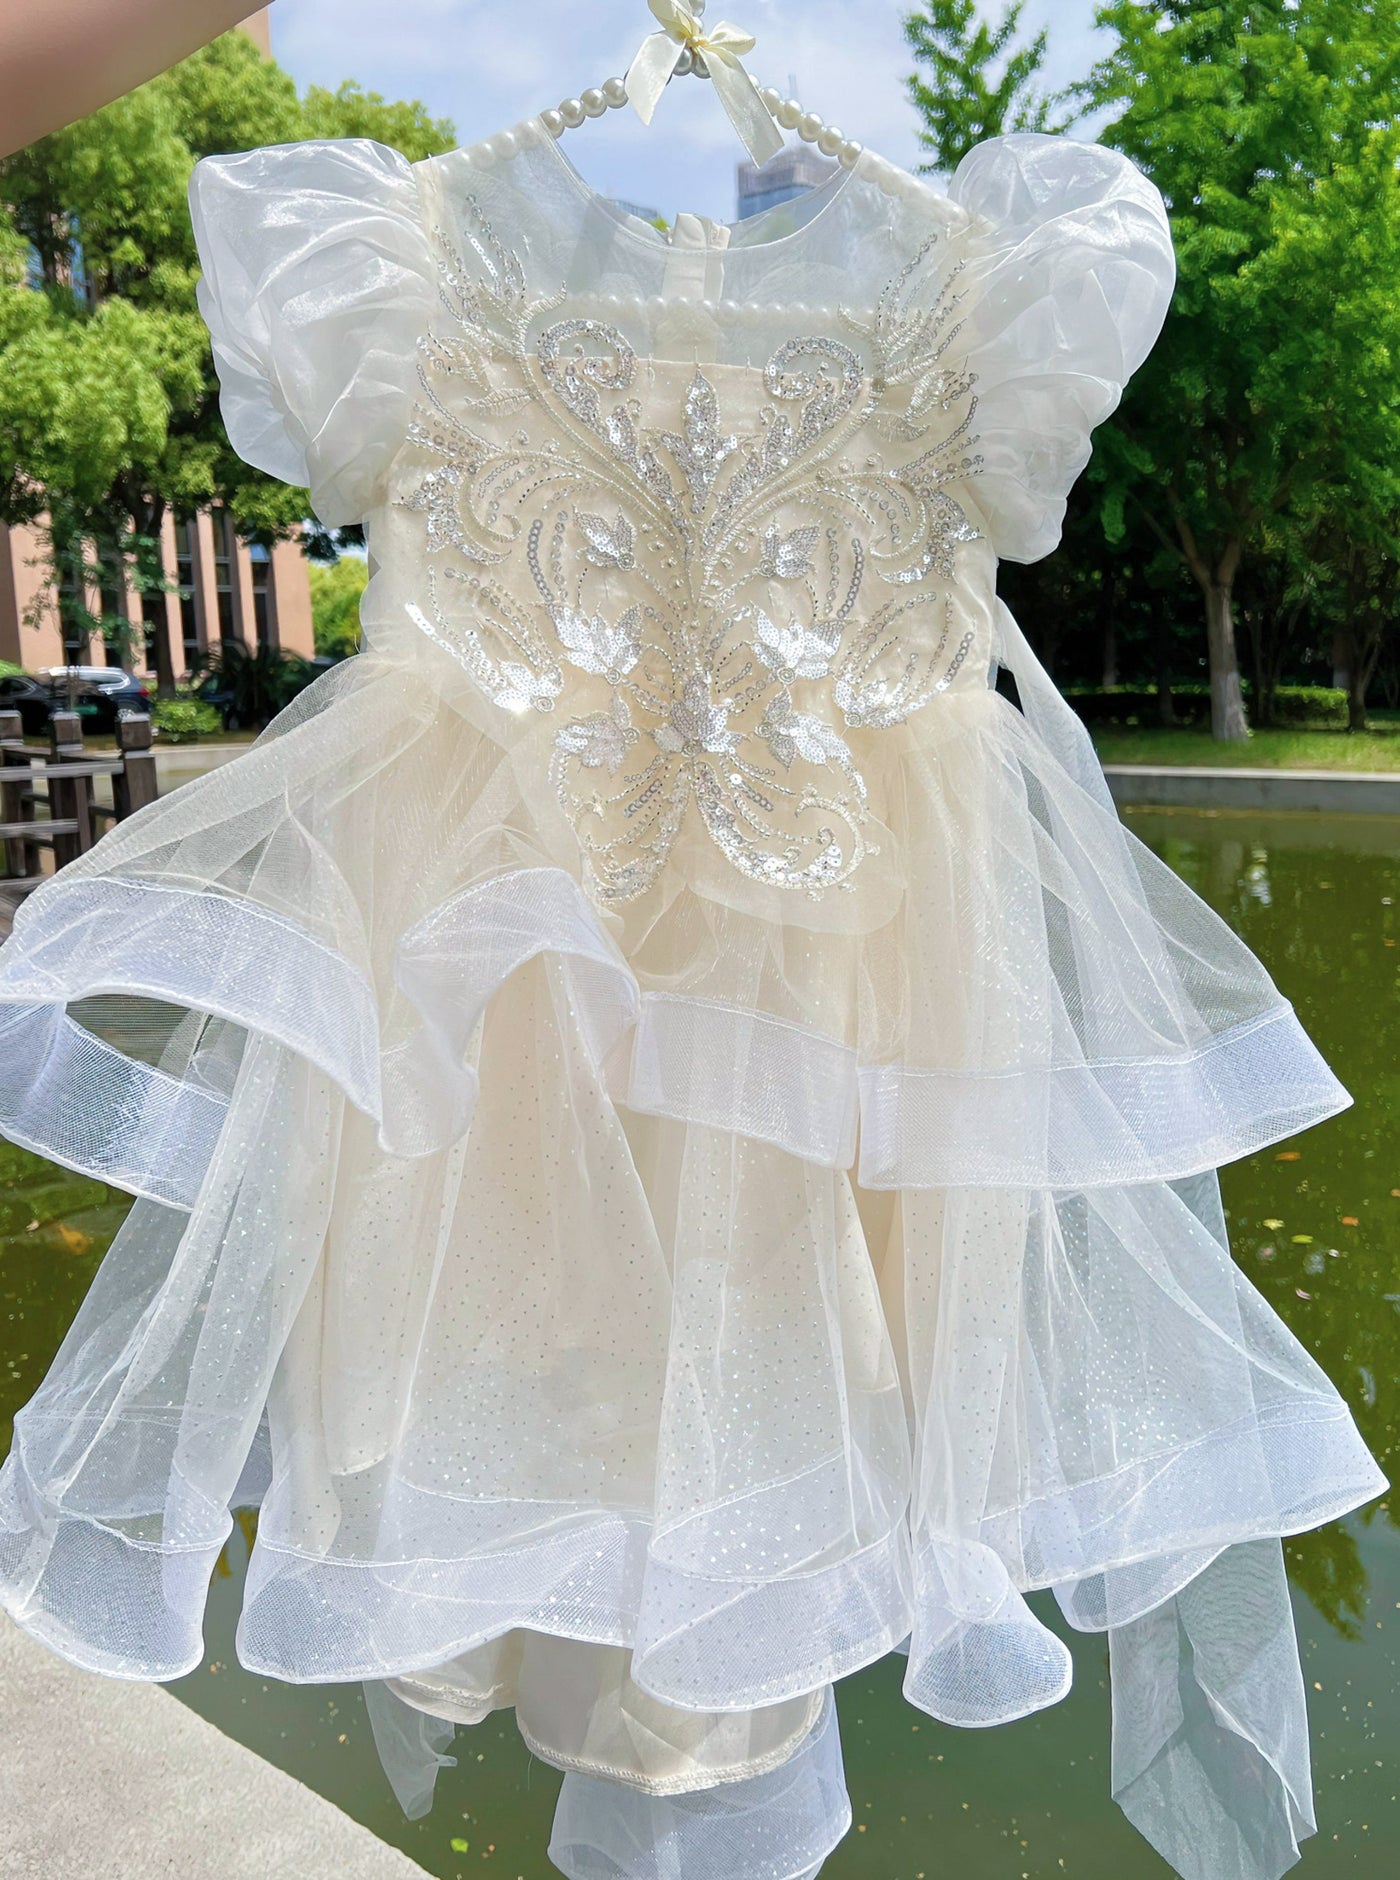 Unleash the Royalty Within - Creamy Princess Dress 2-8yrs - Coco Potato - dresses and partywear for little girls